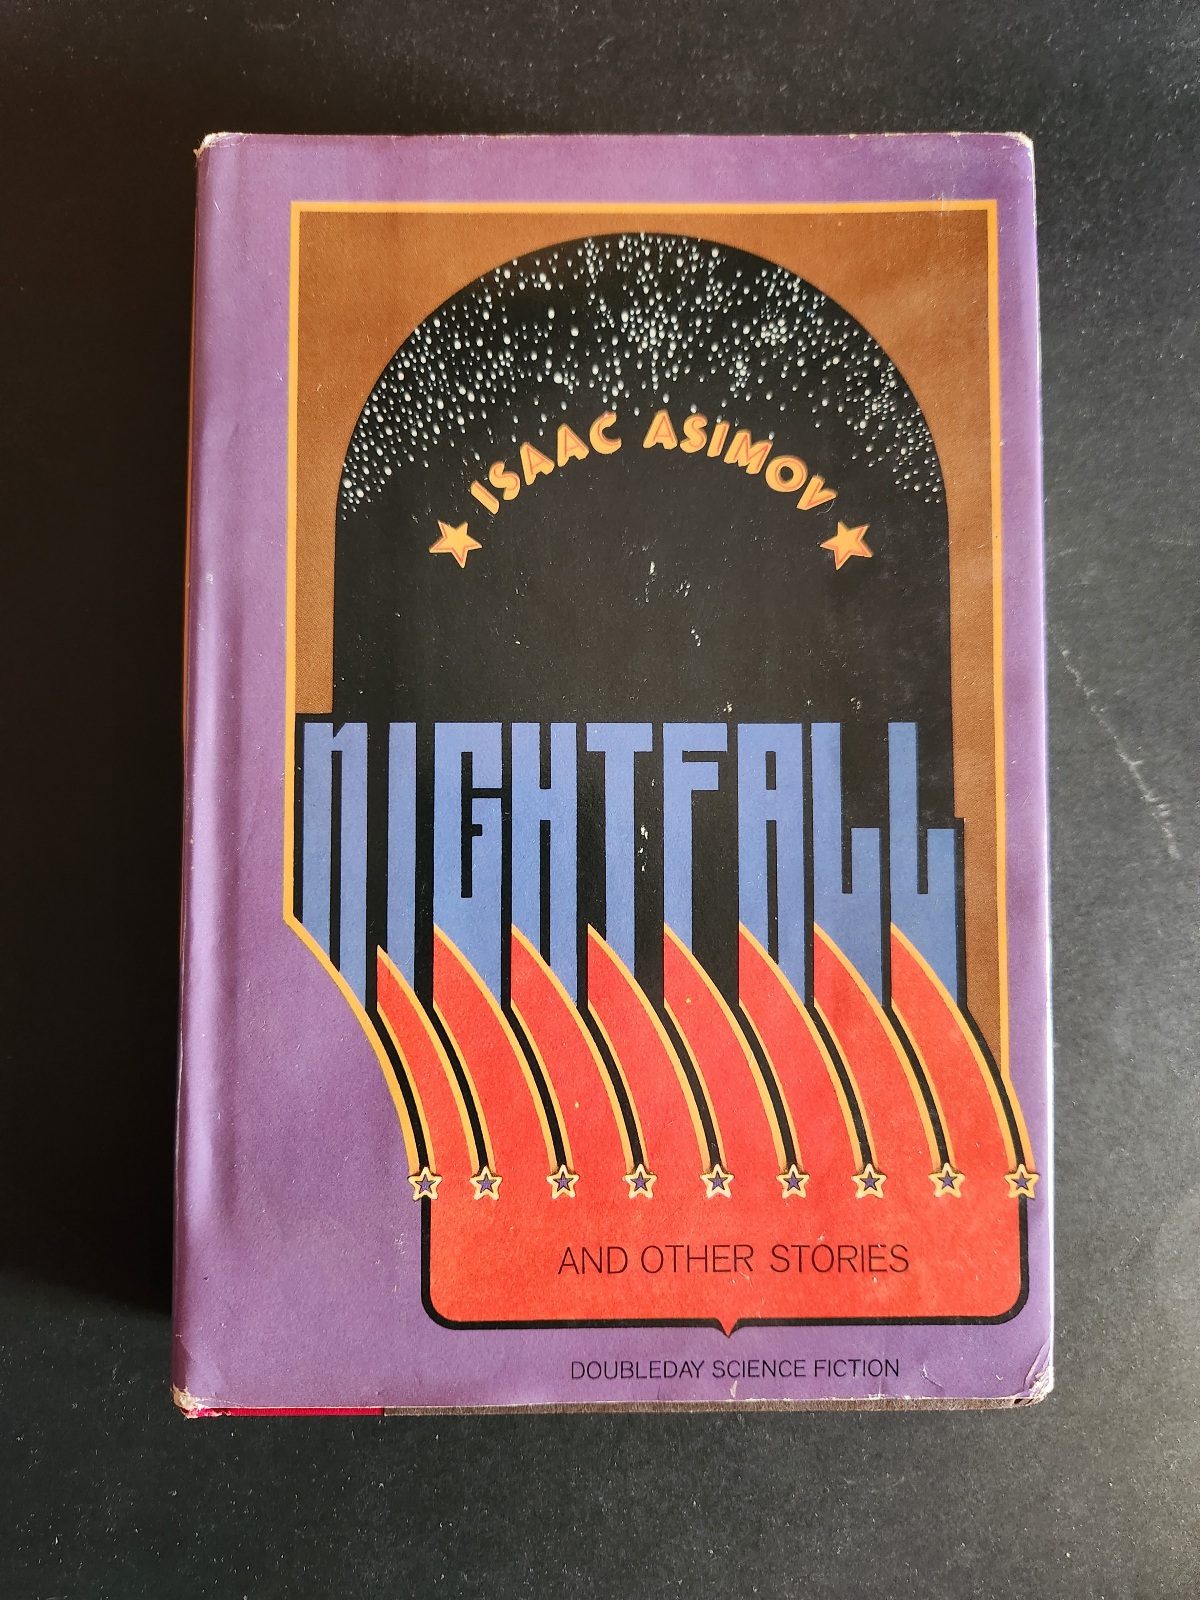 Nightfall and Other Stories by Isaac Asimov 1969 Doubleday Science Fiction Book Club Edition